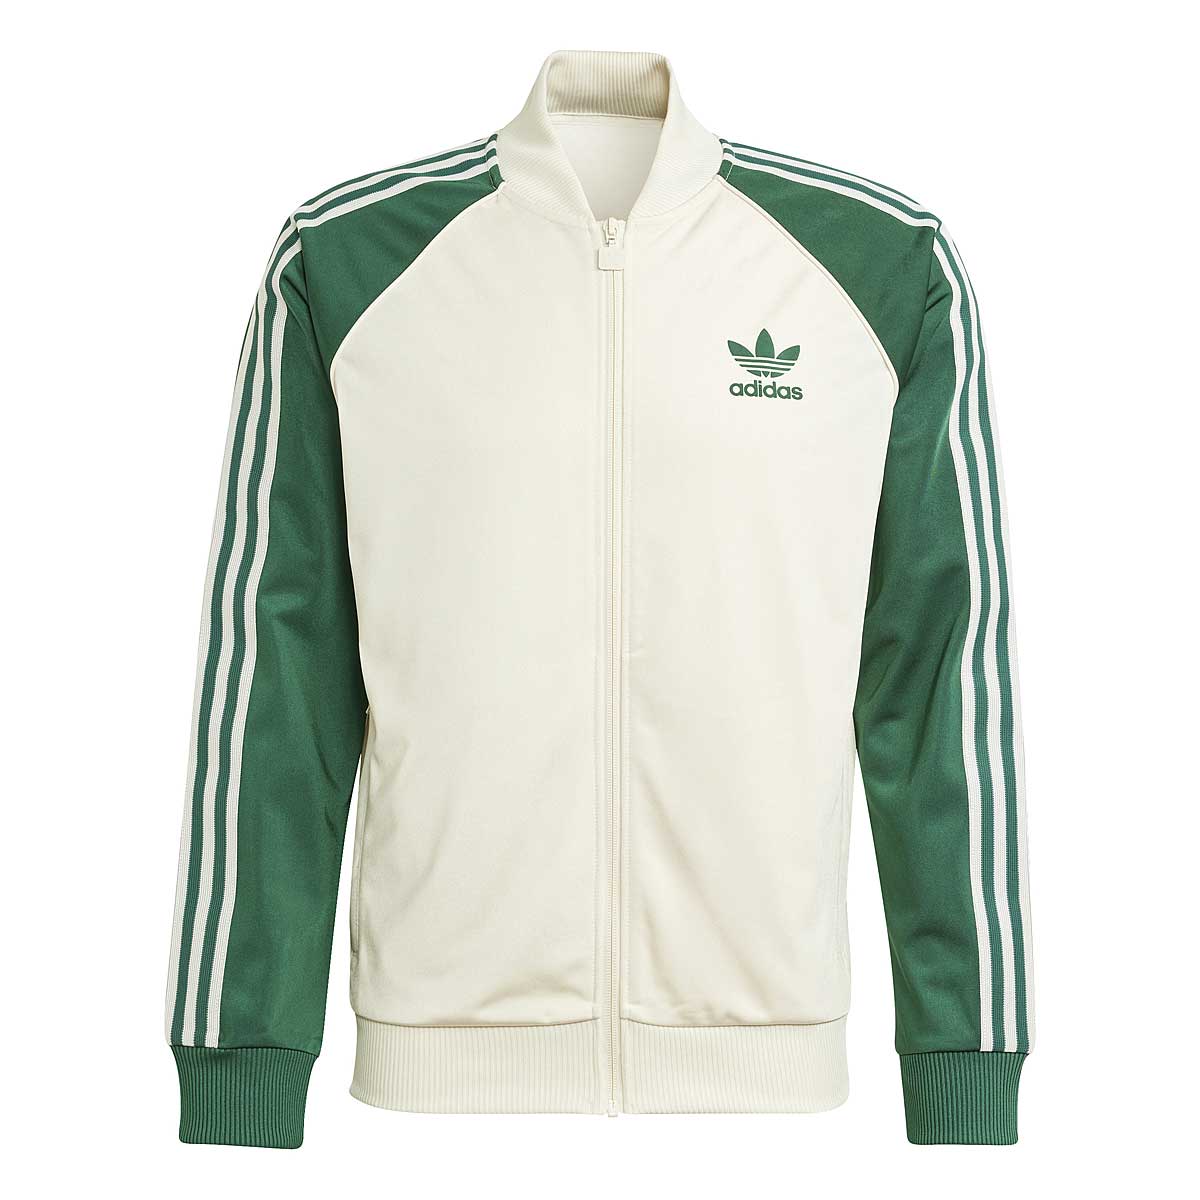 Image of Adidas Superstar Tracktop, White/green